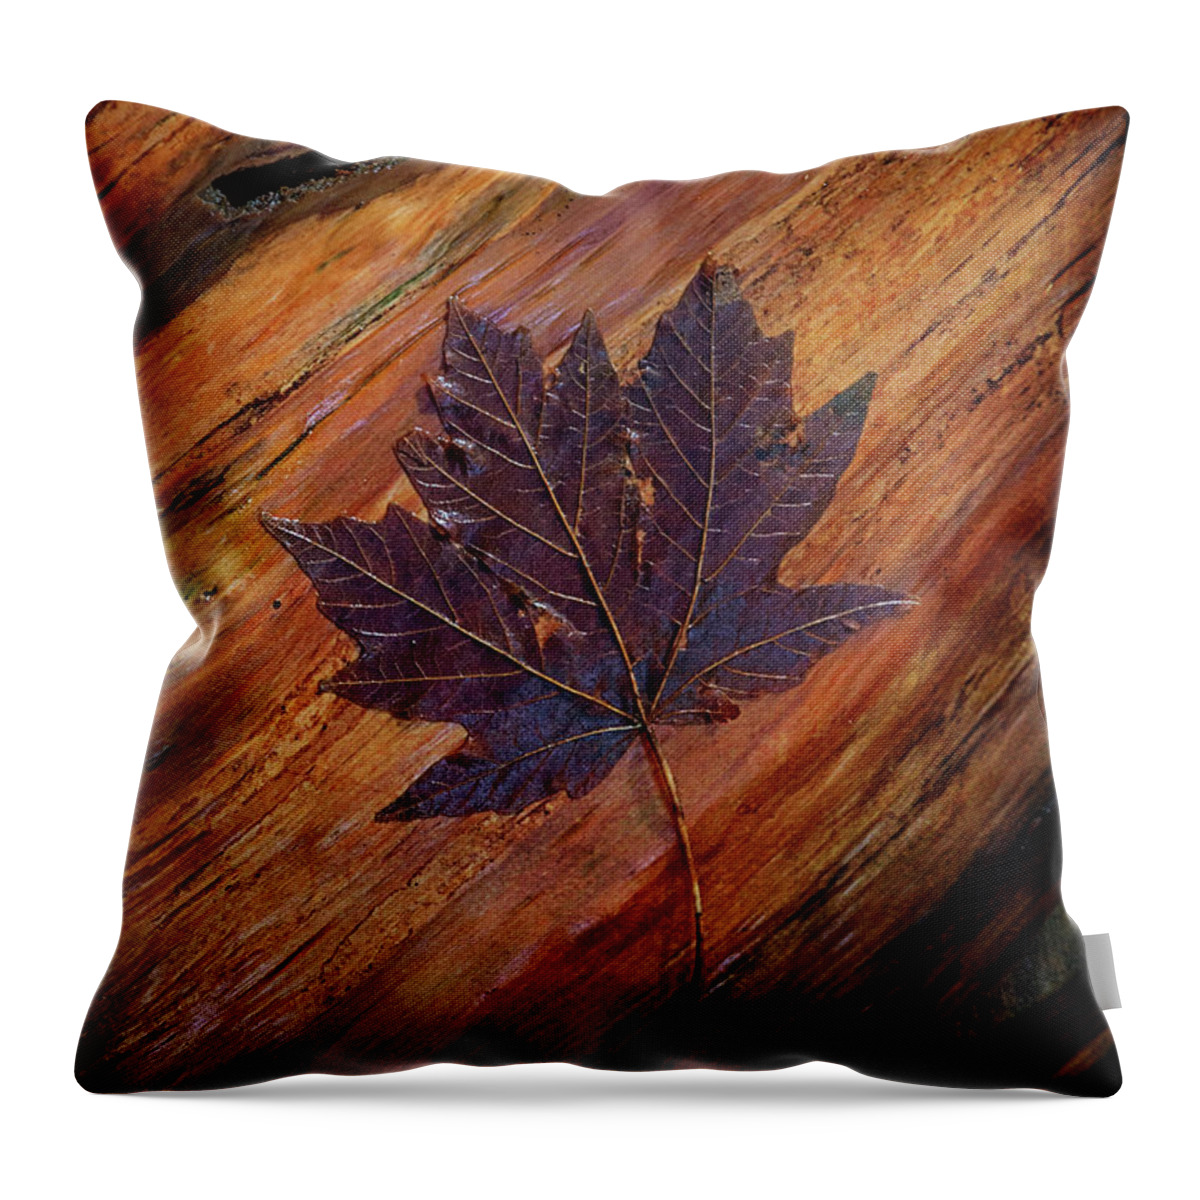 B.c. Throw Pillow featuring the photograph Maple Leaf by Carmen Kern